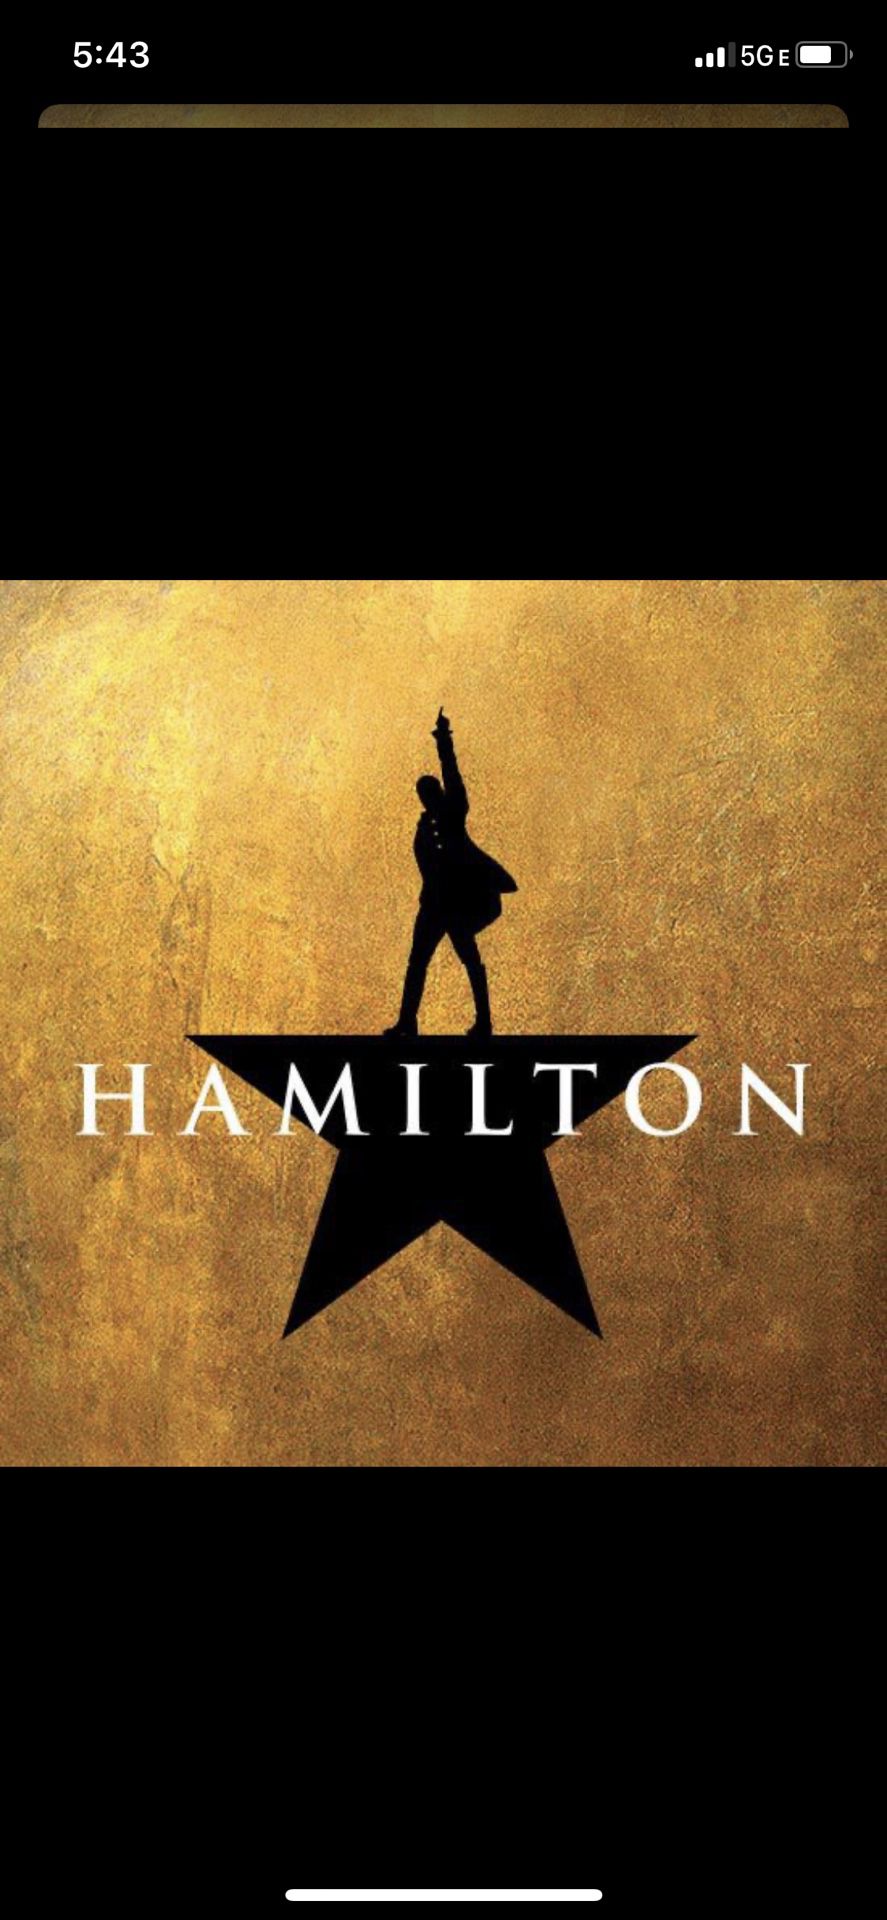 Valentine’s Day tickets to Hamilton for two